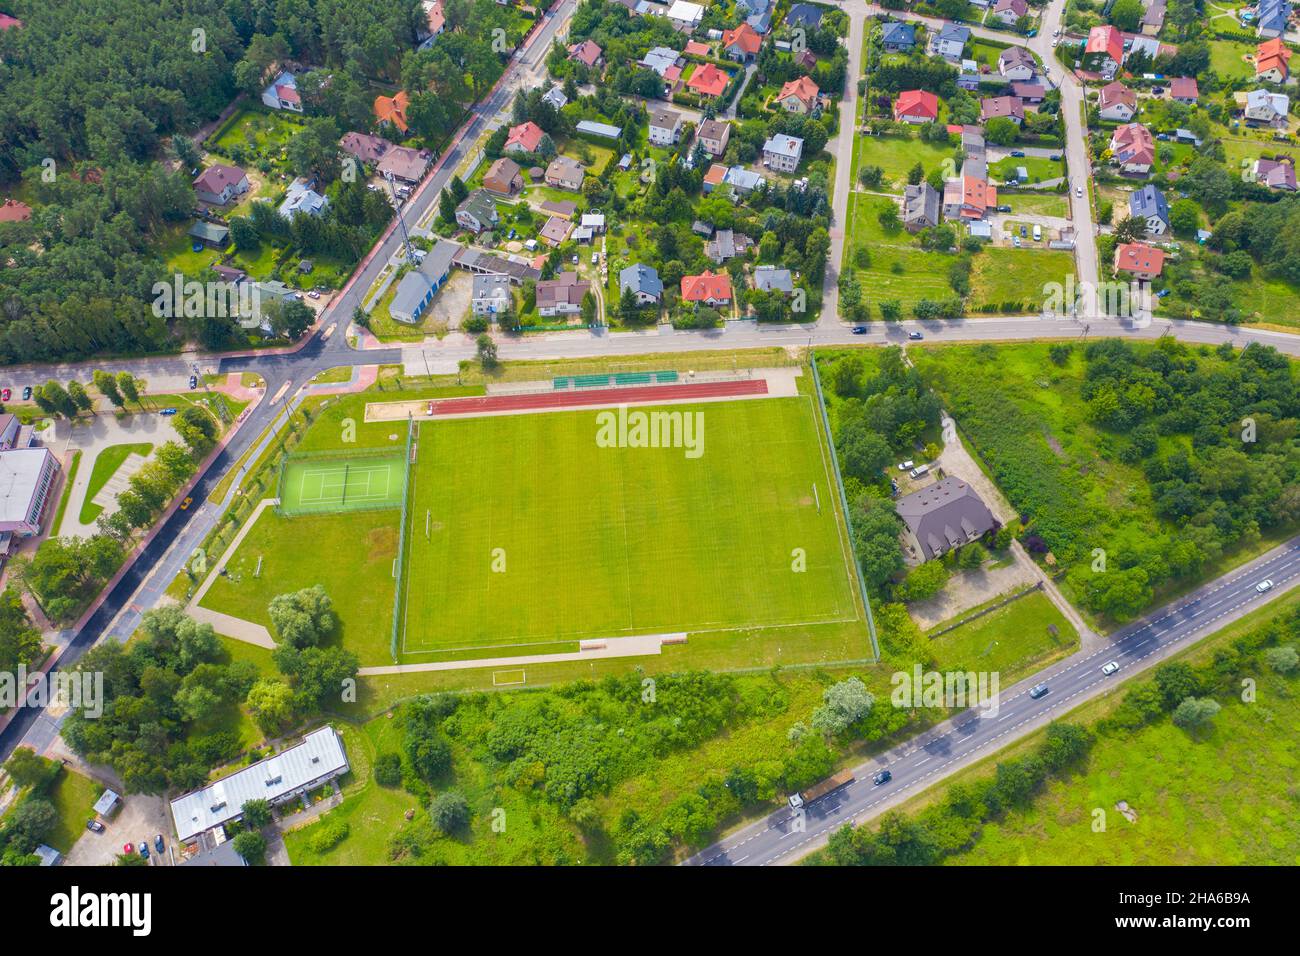 Aerial Drone photo of a Soccer/Football field Stock Photo